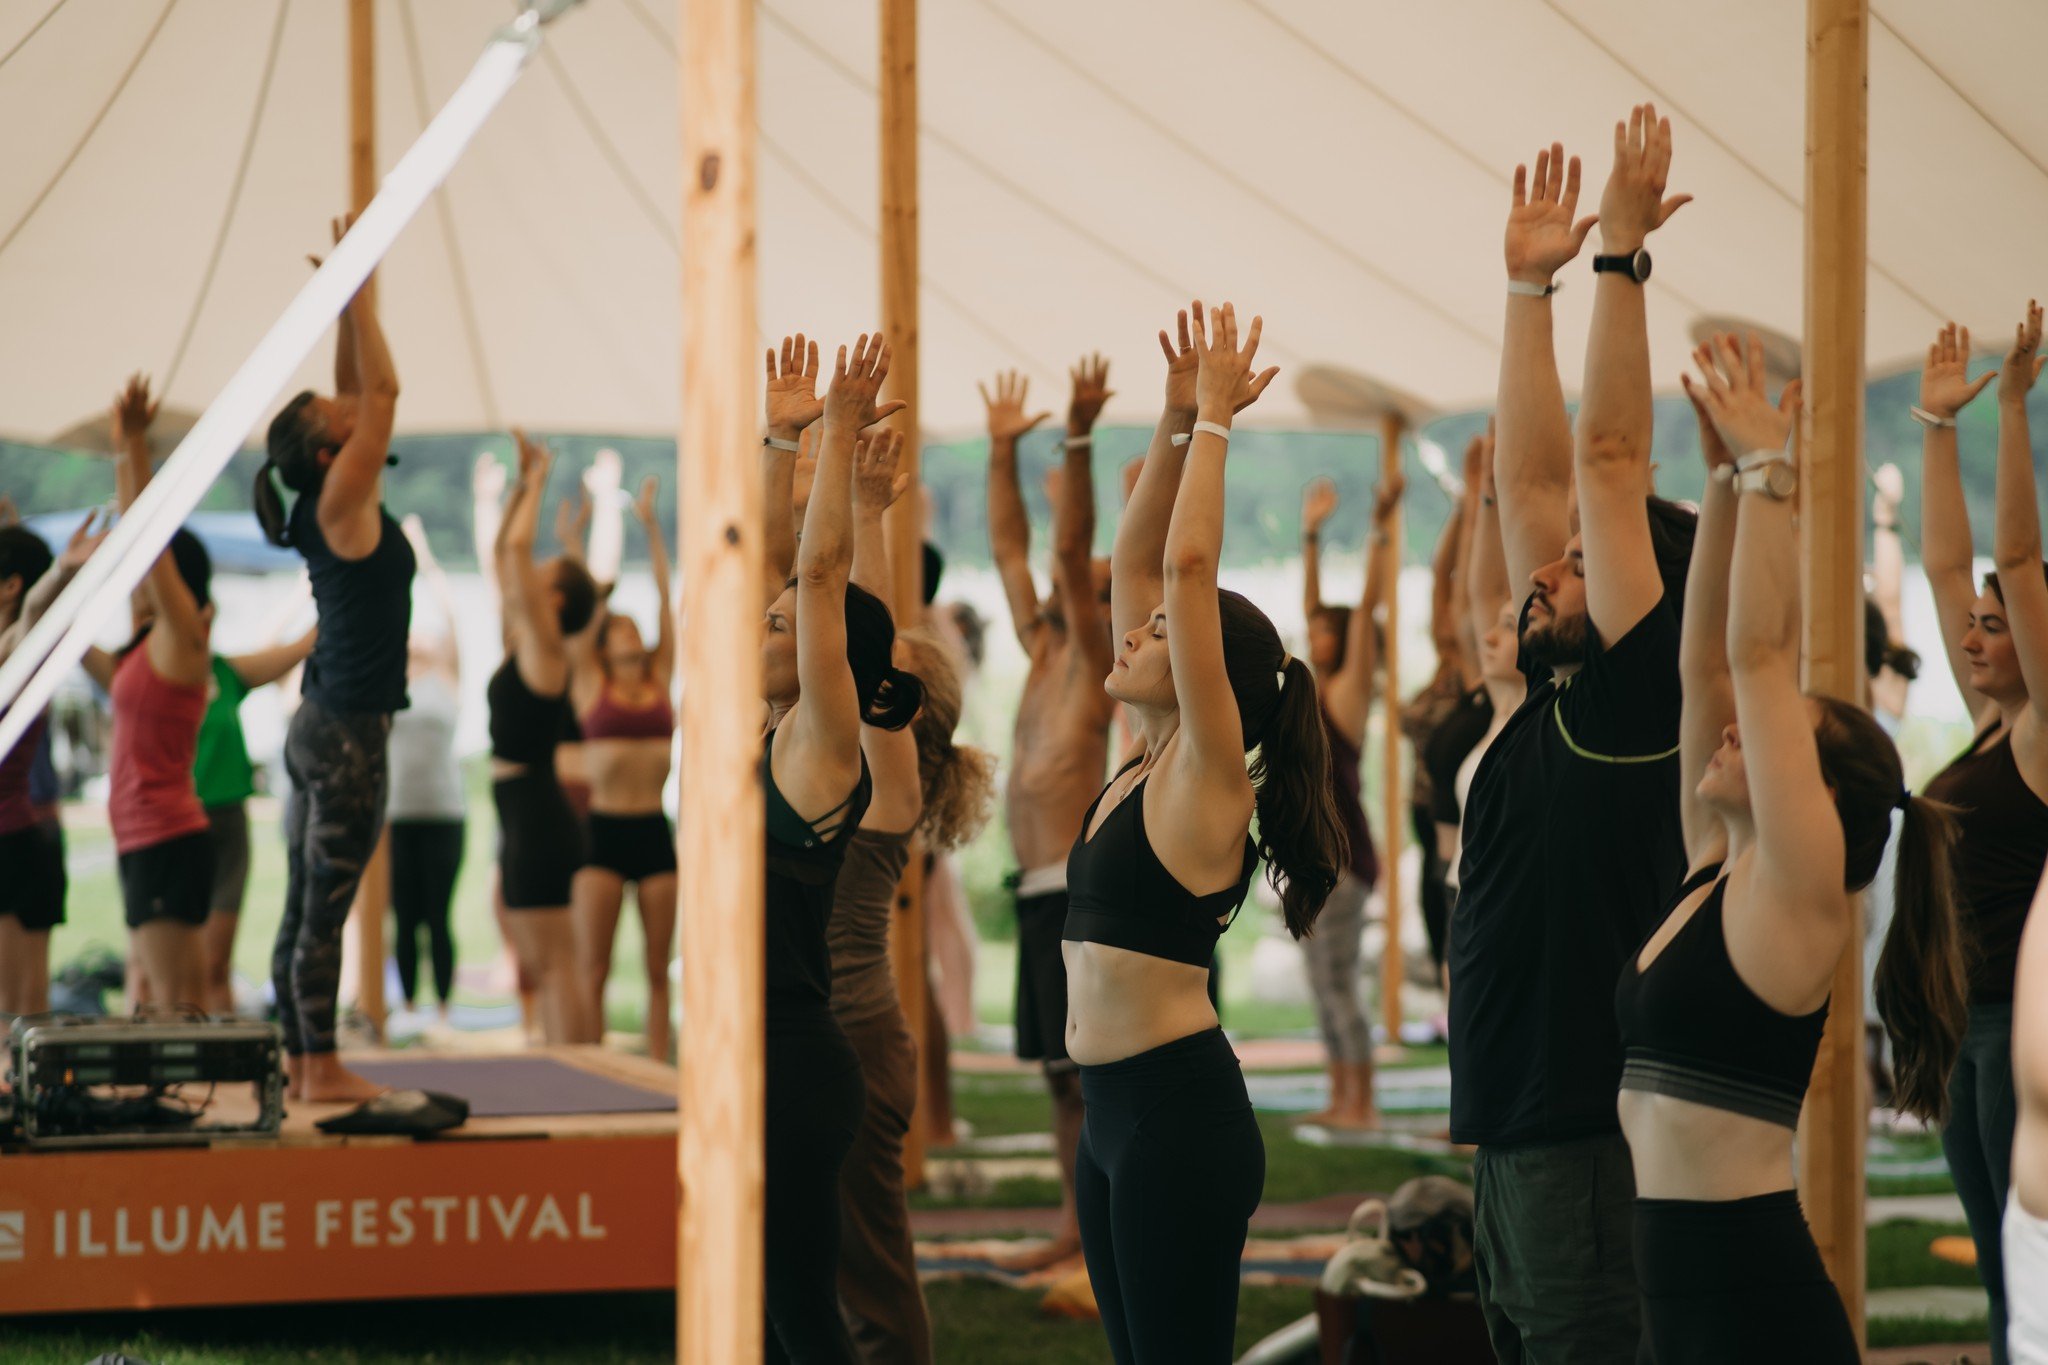 Step into a world of blissful harmony at the Illume Festival ✨

Look forward to our selection of yoga and wellness classes, music events and street fair for a unique 3 day event in the heart of Hudson.

Tickets now available: Enjoy 20% off with our e